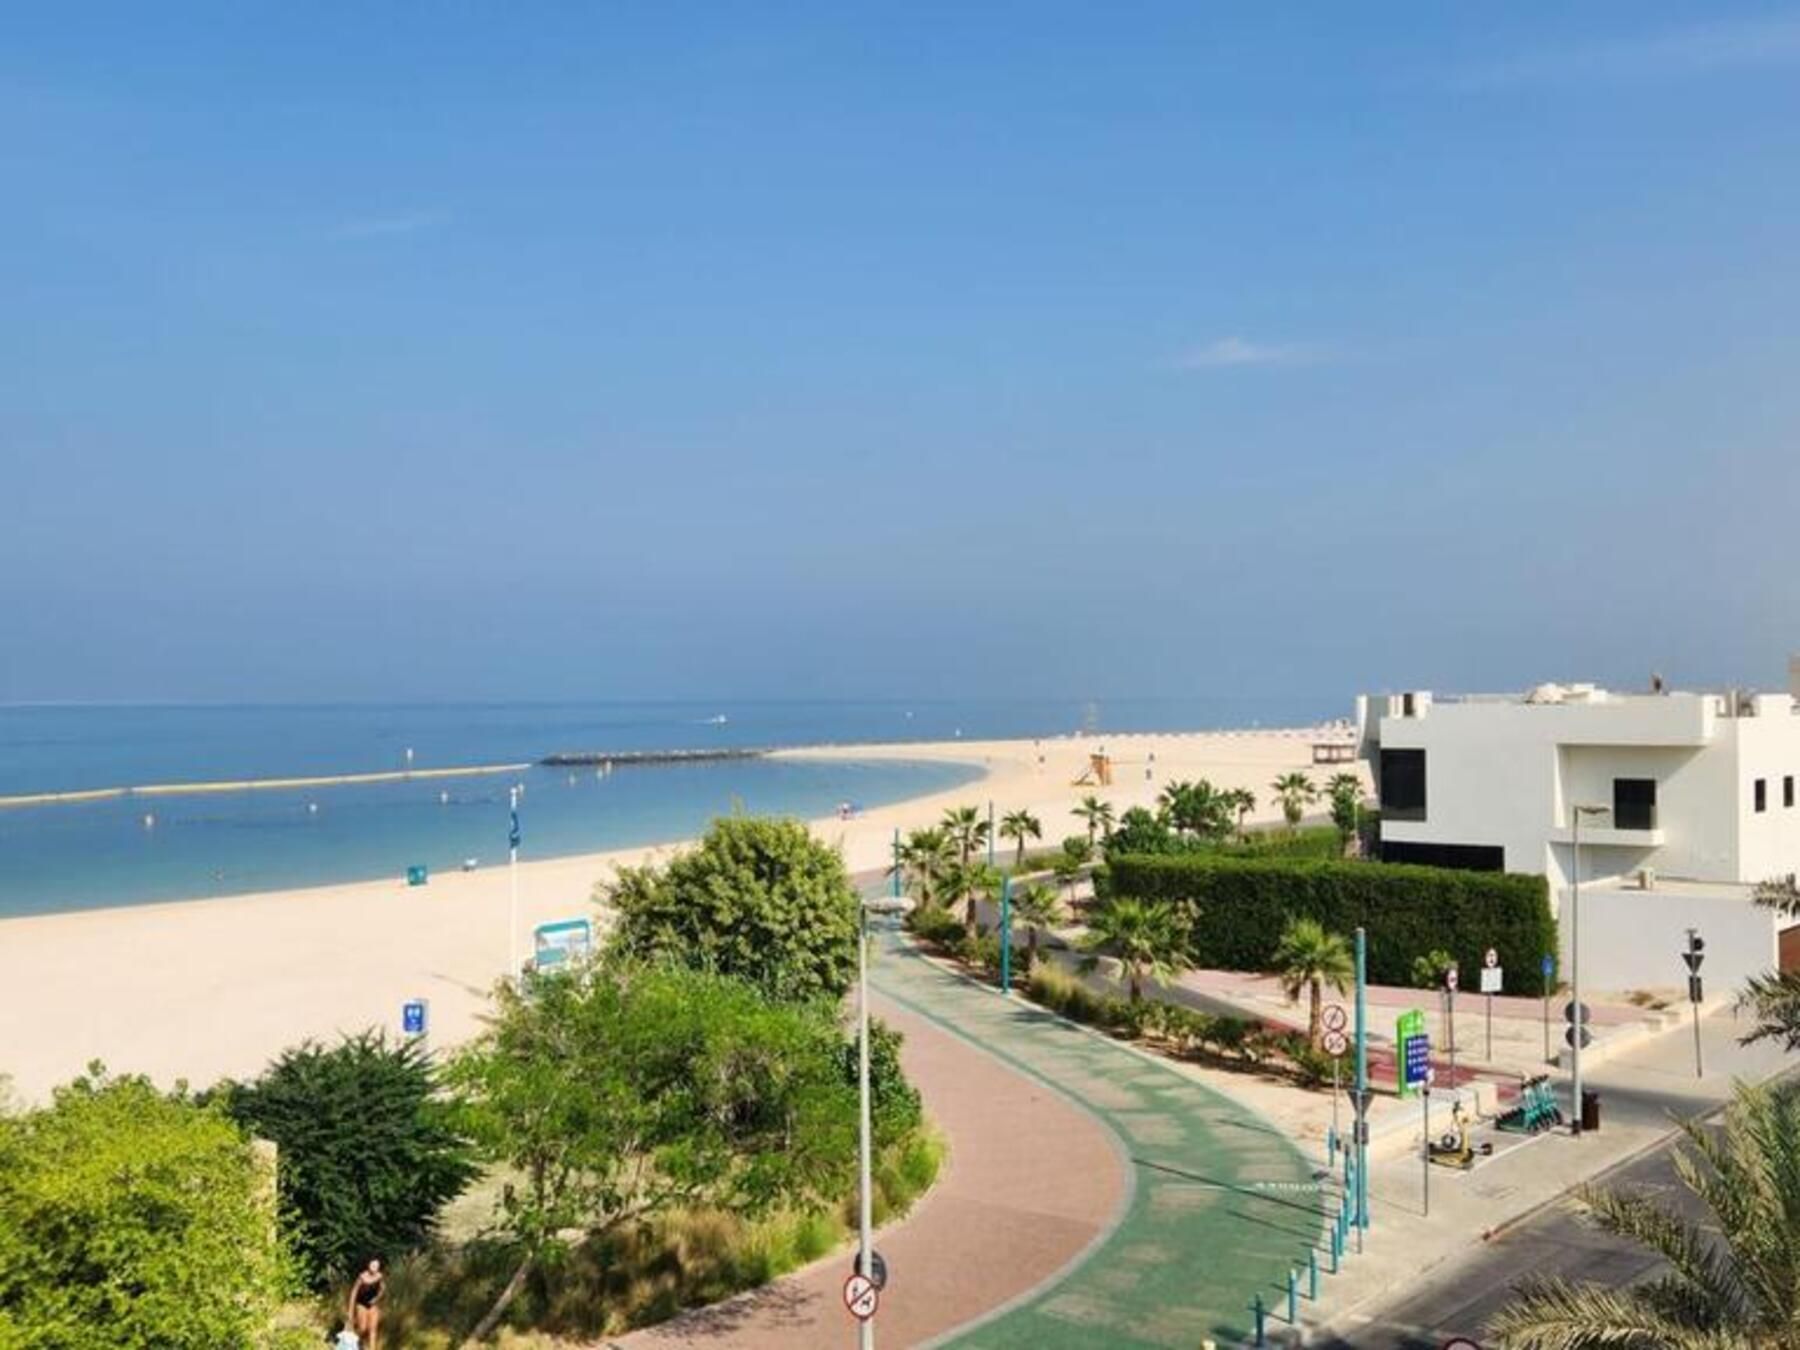 Vast Beachfront Compound with Renovation Potential in Jumeirah: Image 1